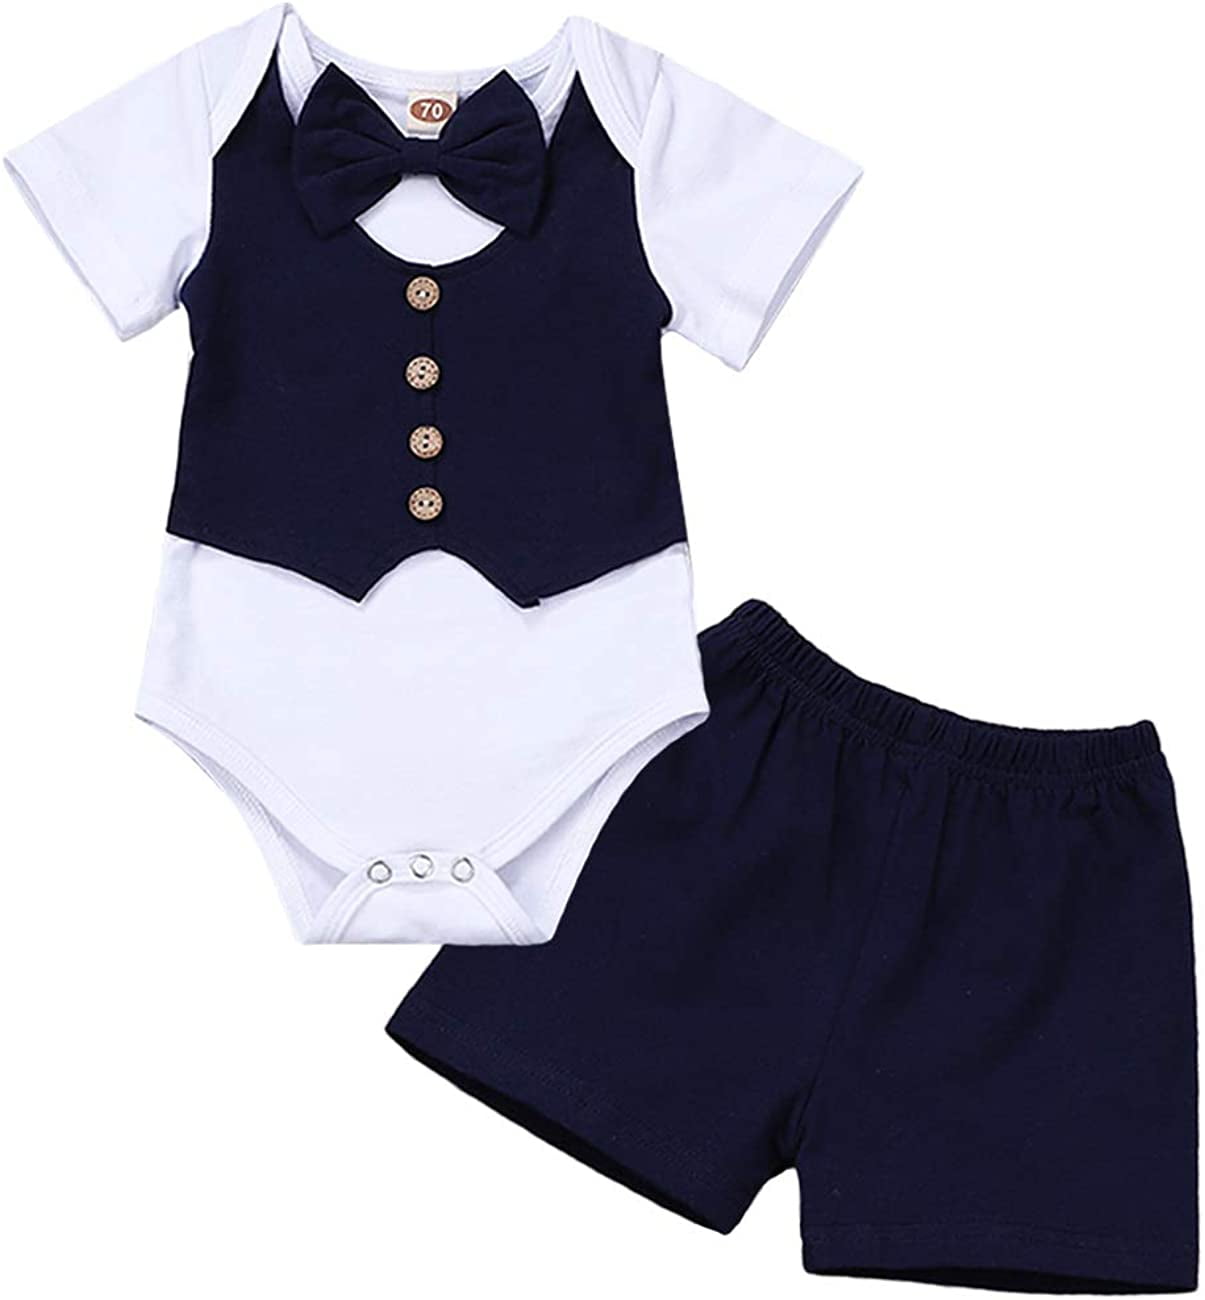 Baby boys clothes wedding birthday party suit Tuxedo cotton bodysuit jumpers 